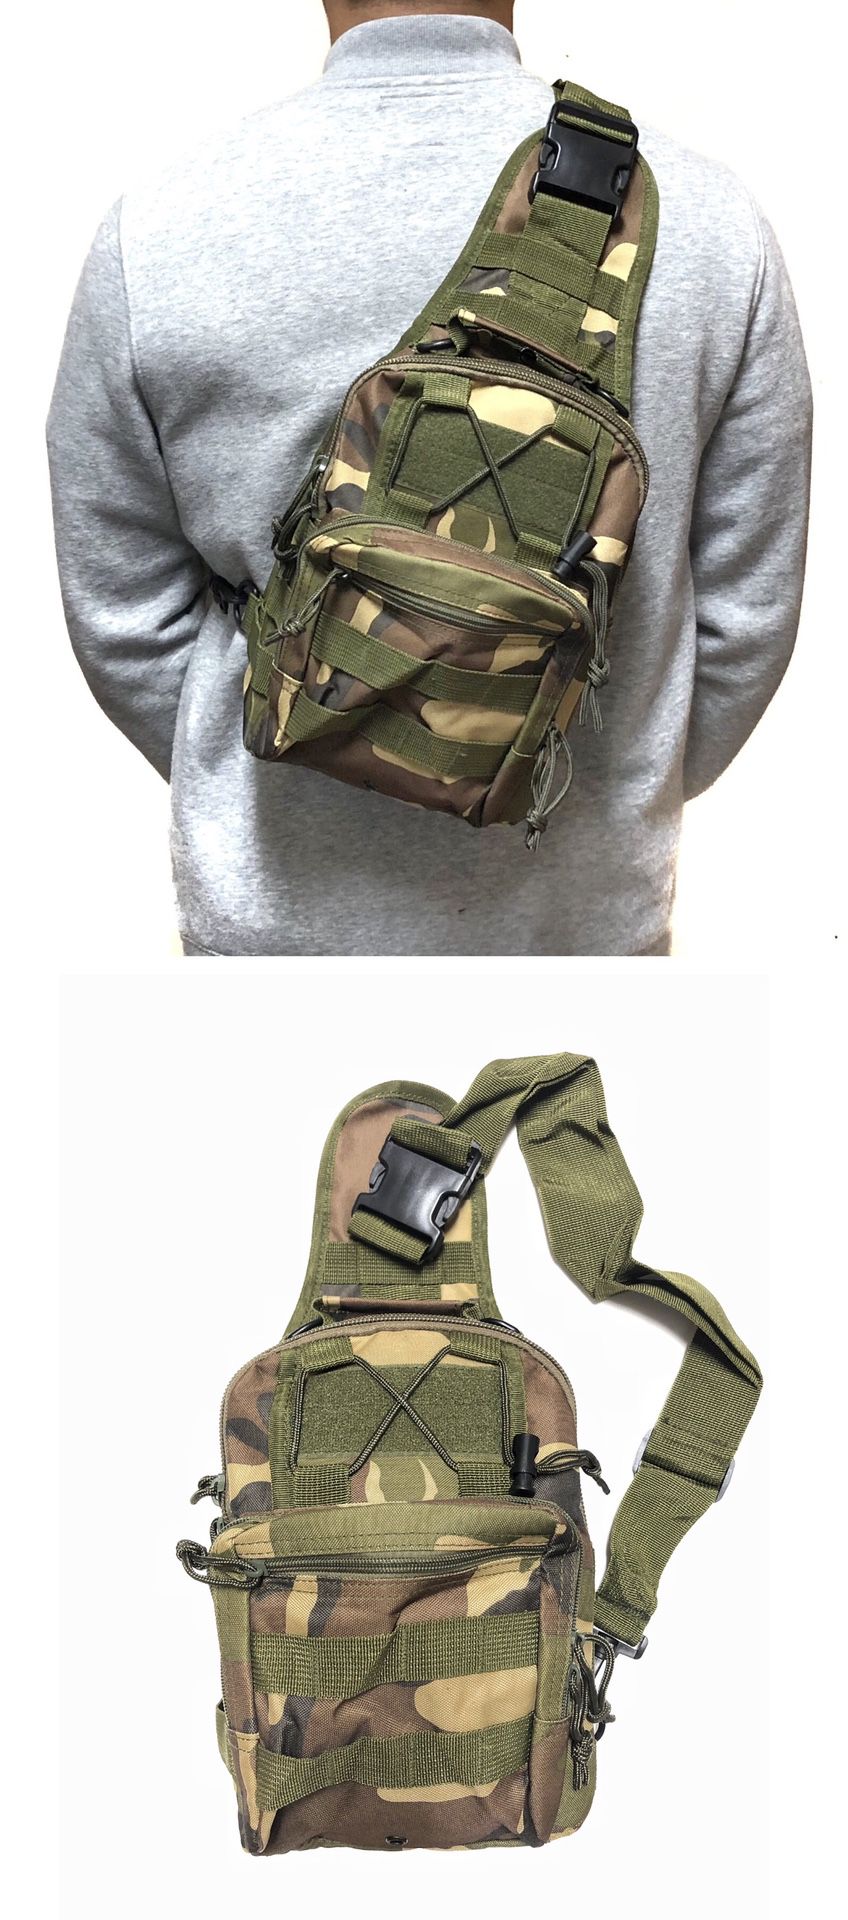 NEW! Camouflage Tactical military style Side Bag Cross body bag backpack sling pouch chest bag camping hiking day pack shoulder bag